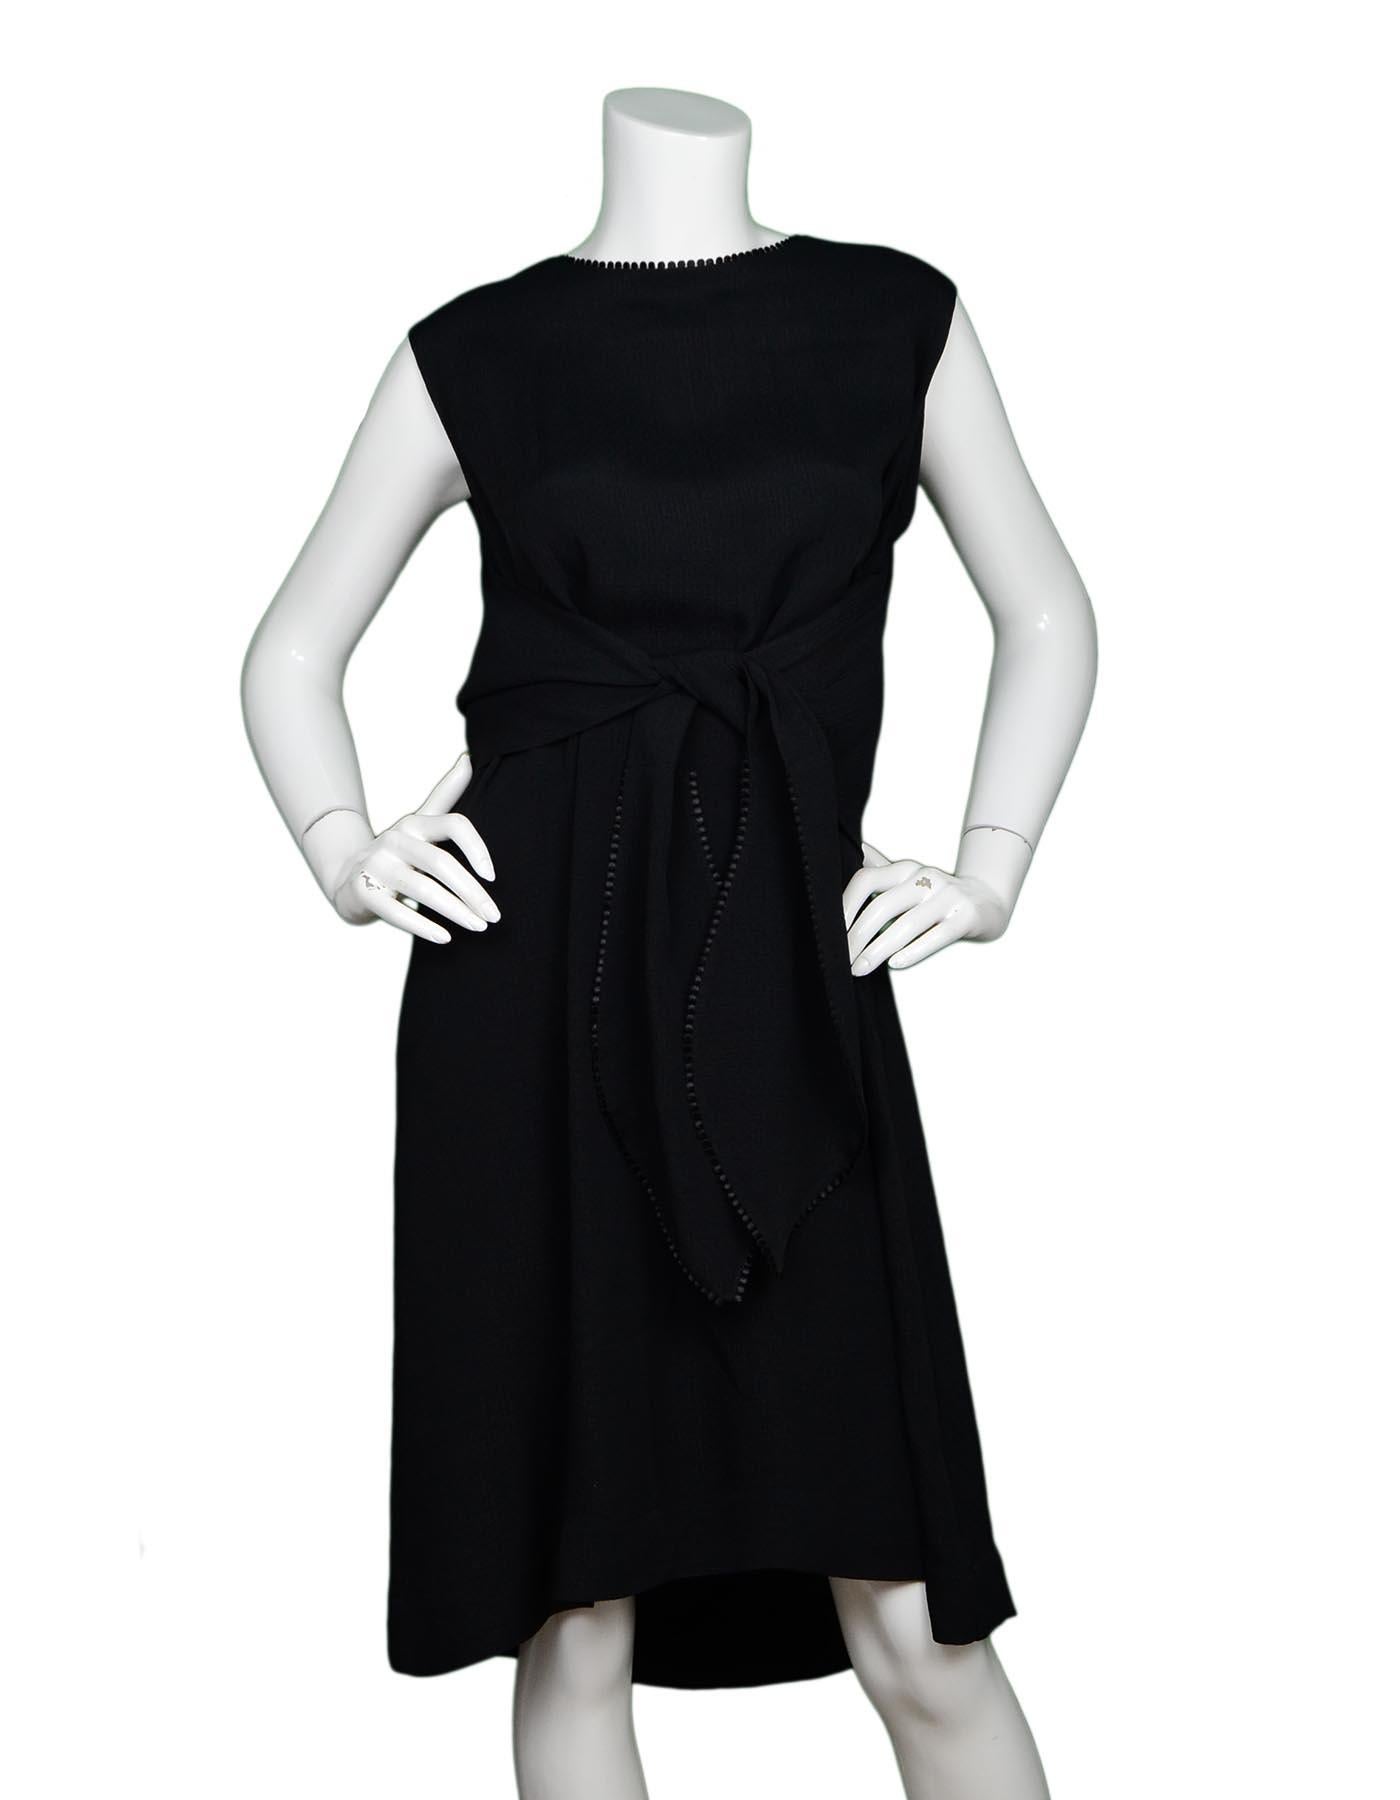 Lela Rose Black Sleeveless Trapeze Dress Sz 16

Made In:  USA
Color: Black
Materials: 82% acetate, 18% viscose
Opening/Closure: Hidden back zipper with hook eye at top
Overall Condition: Excellent pre-owned condition 

Measurements: 
Shoulder To